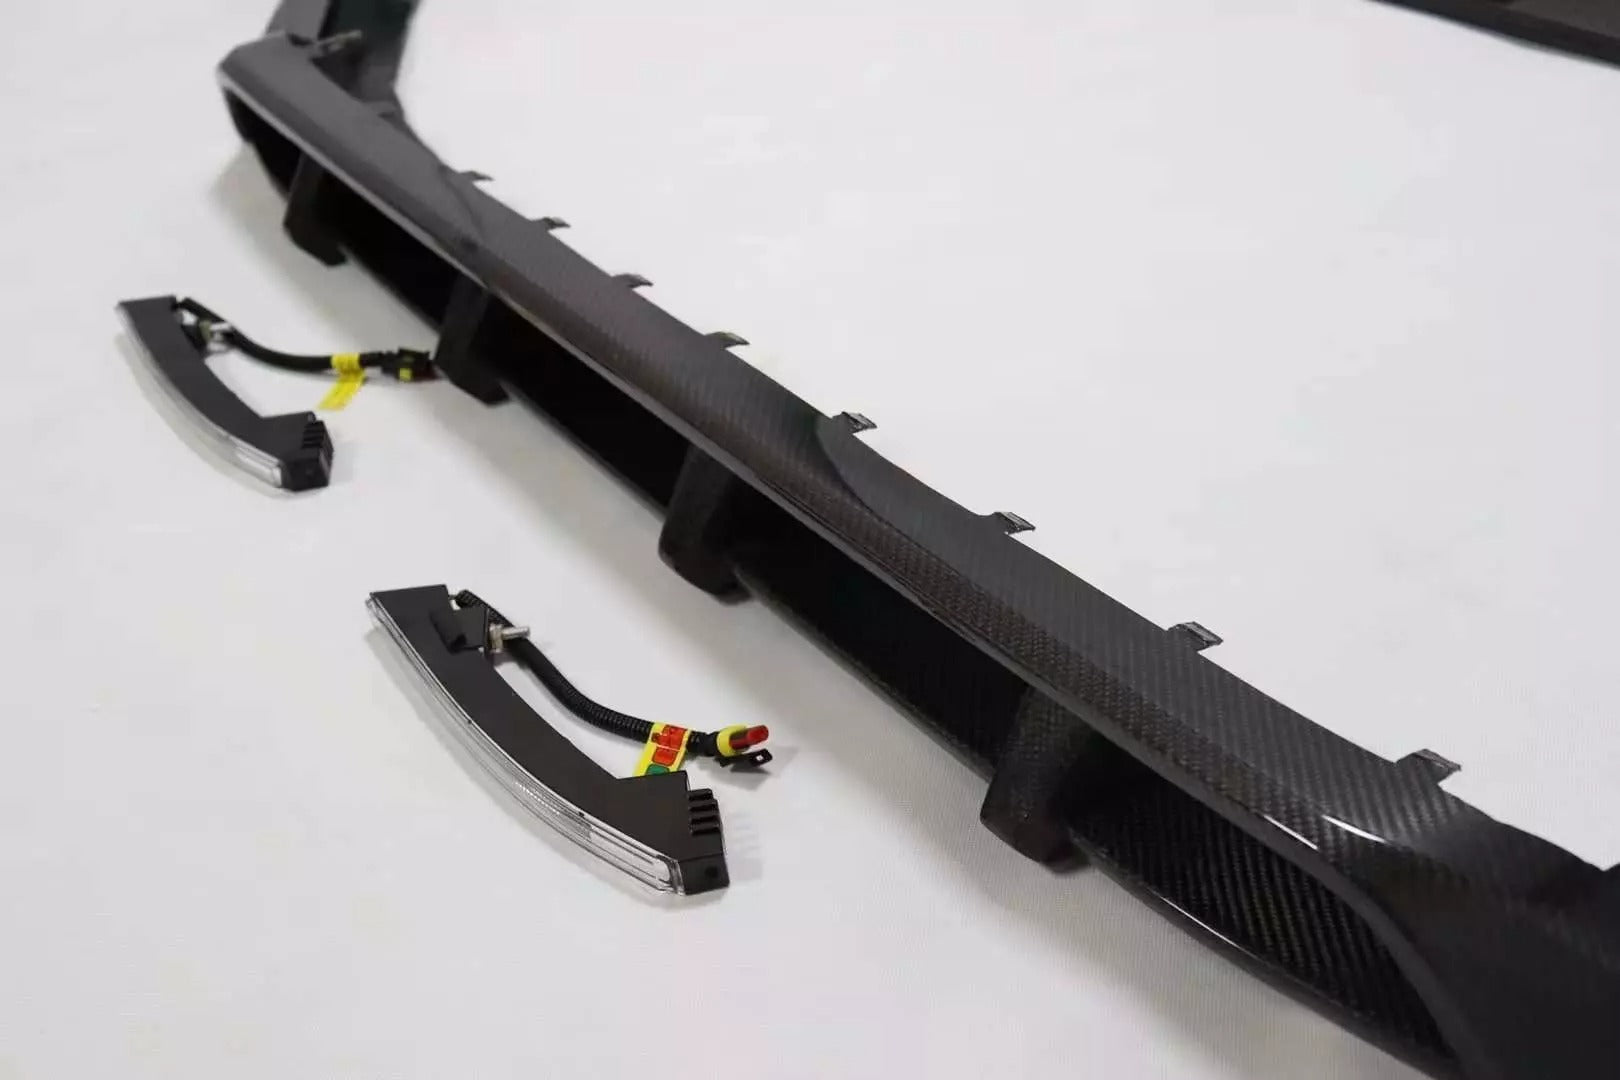 Carbon fiber front and rear diffusers for G63 AMG Mercedes-Benz G-Class W463A W464